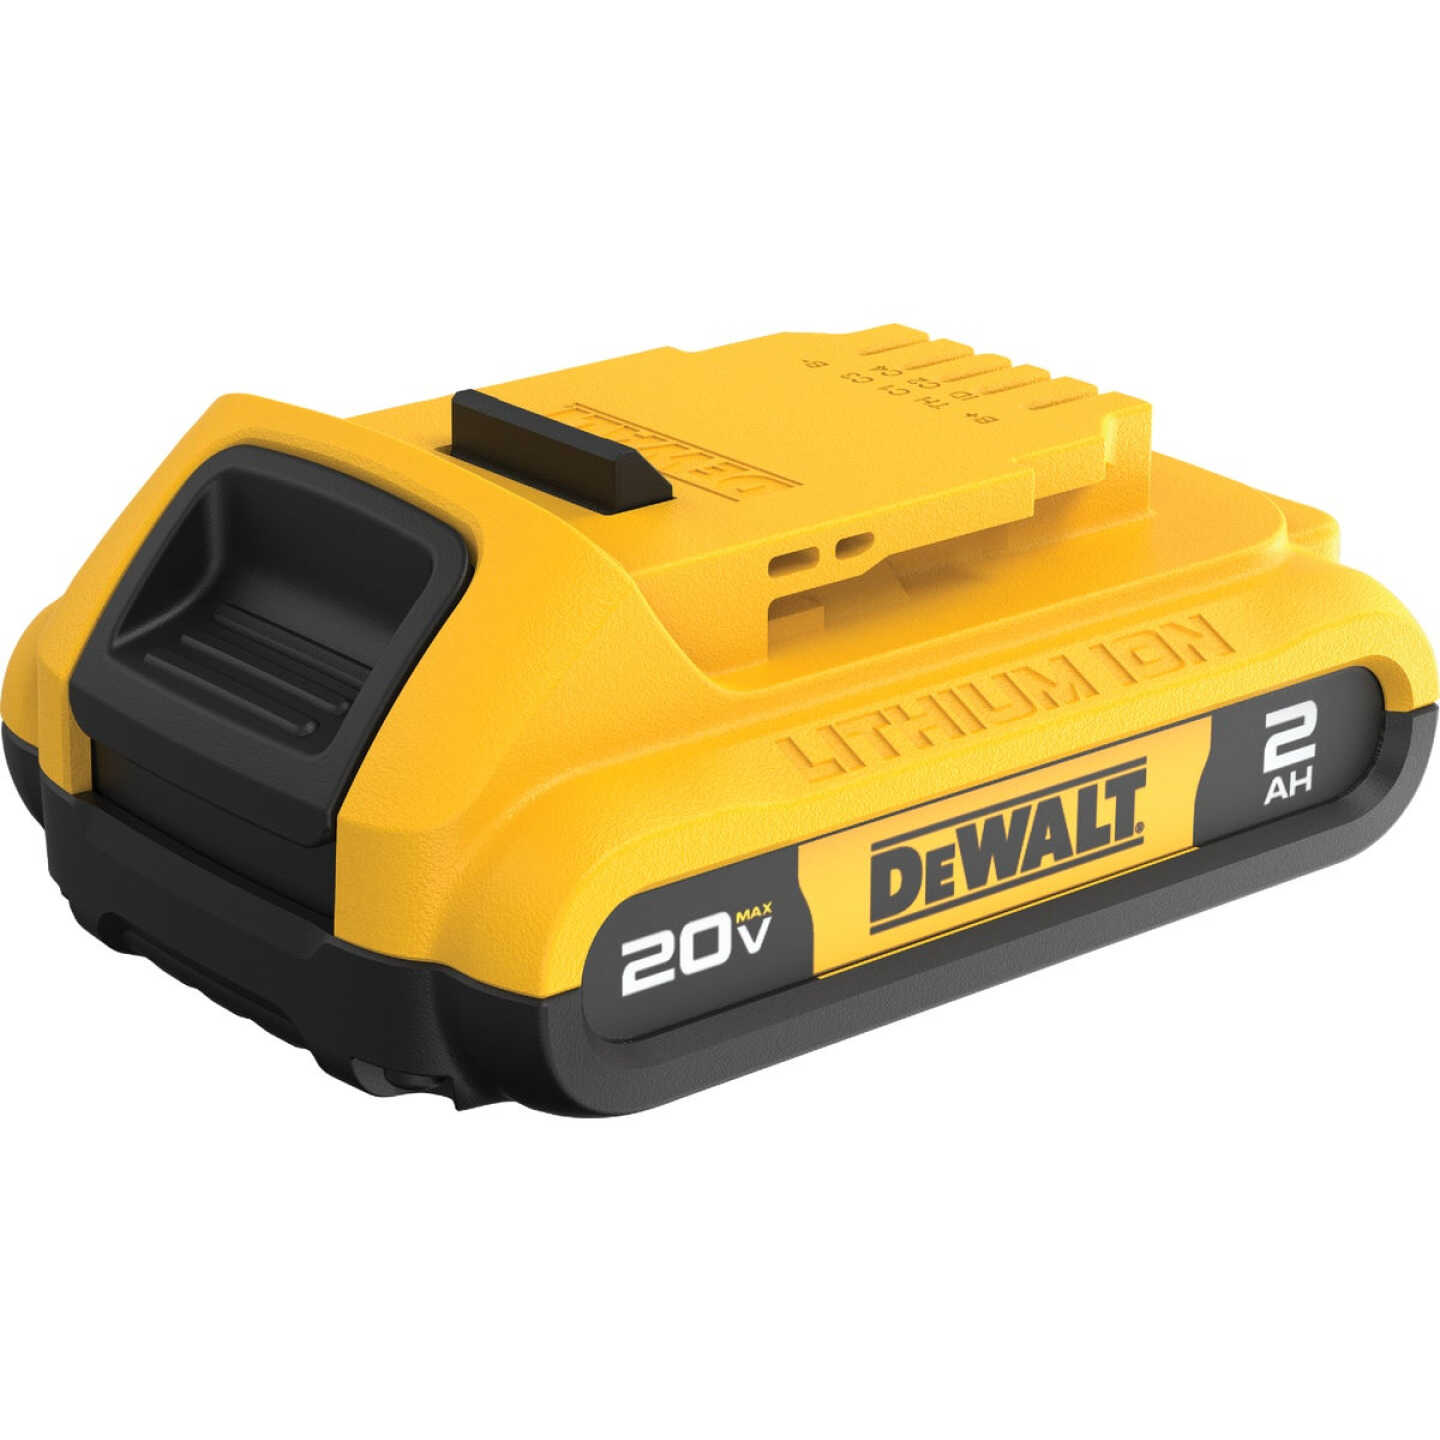 DEWALT 20V MAX Compact Cordless Jobsite Blower (Tool Only) - Power Townsend  Company